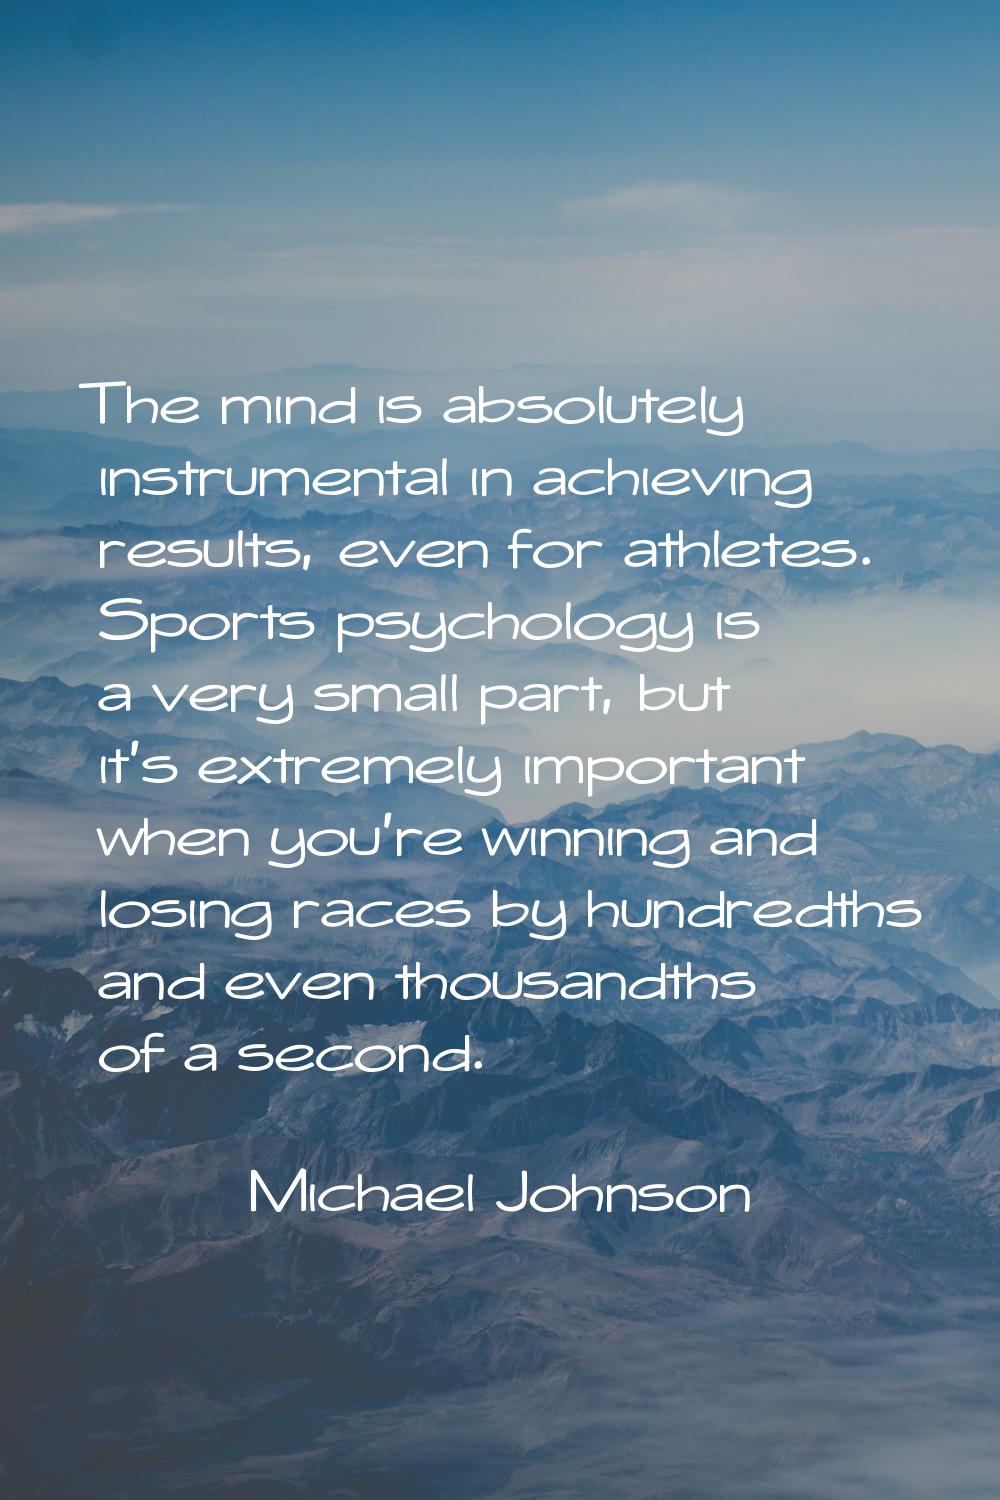 The mind is absolutely instrumental in achieving results, even for athletes. Sports psychology is a